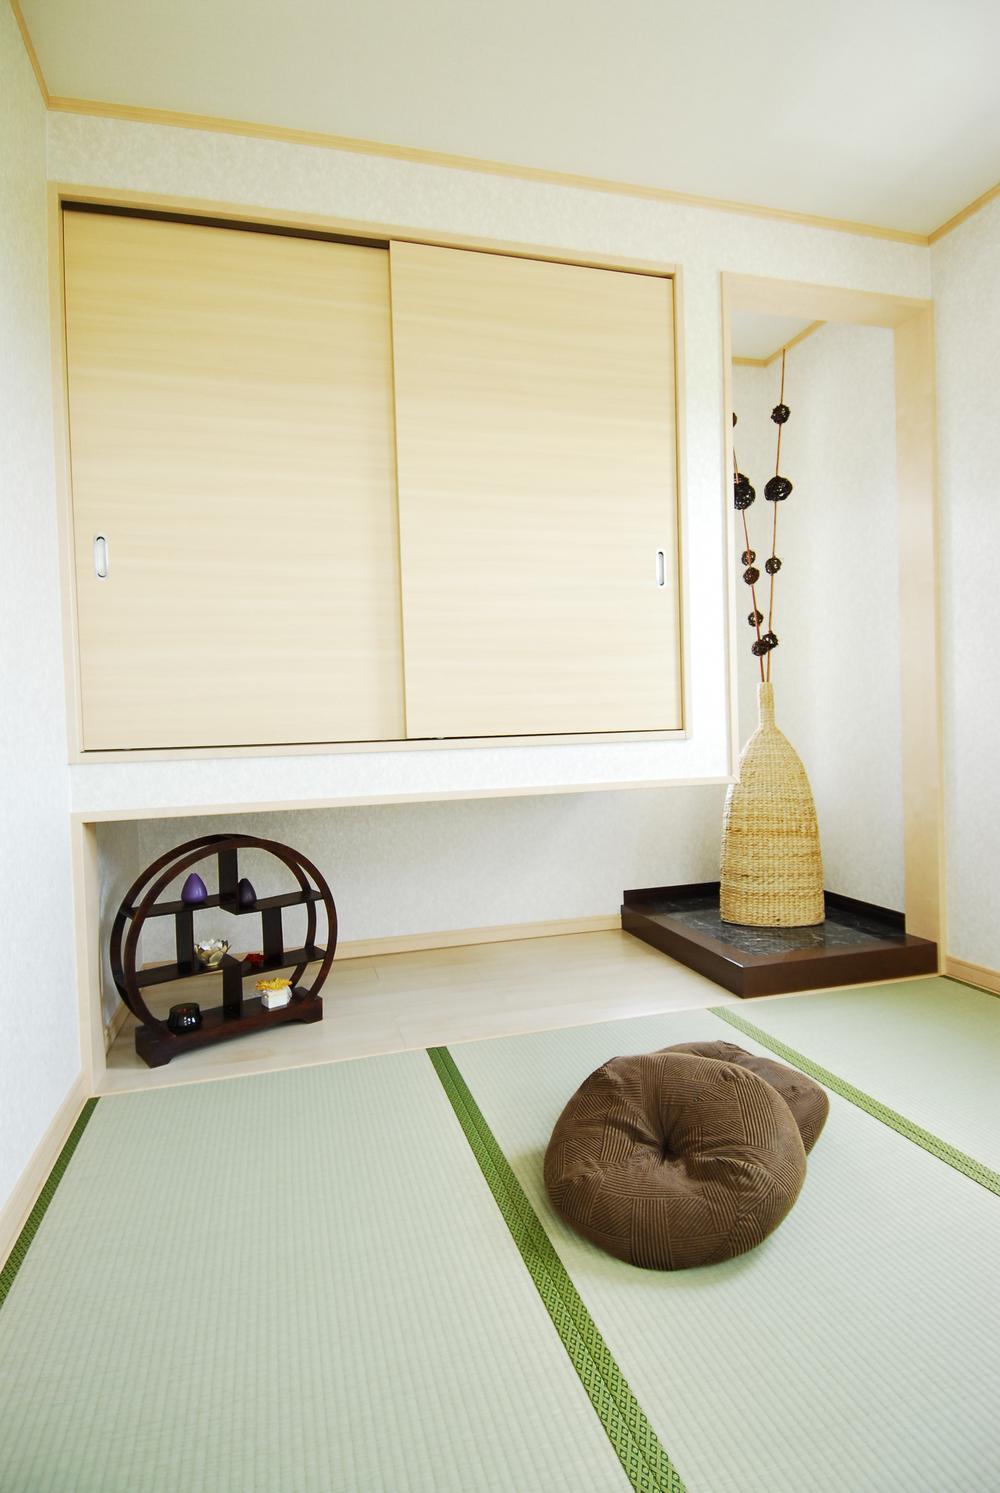 Same specifications photos (Other introspection). (10 Building) Japanese-style room